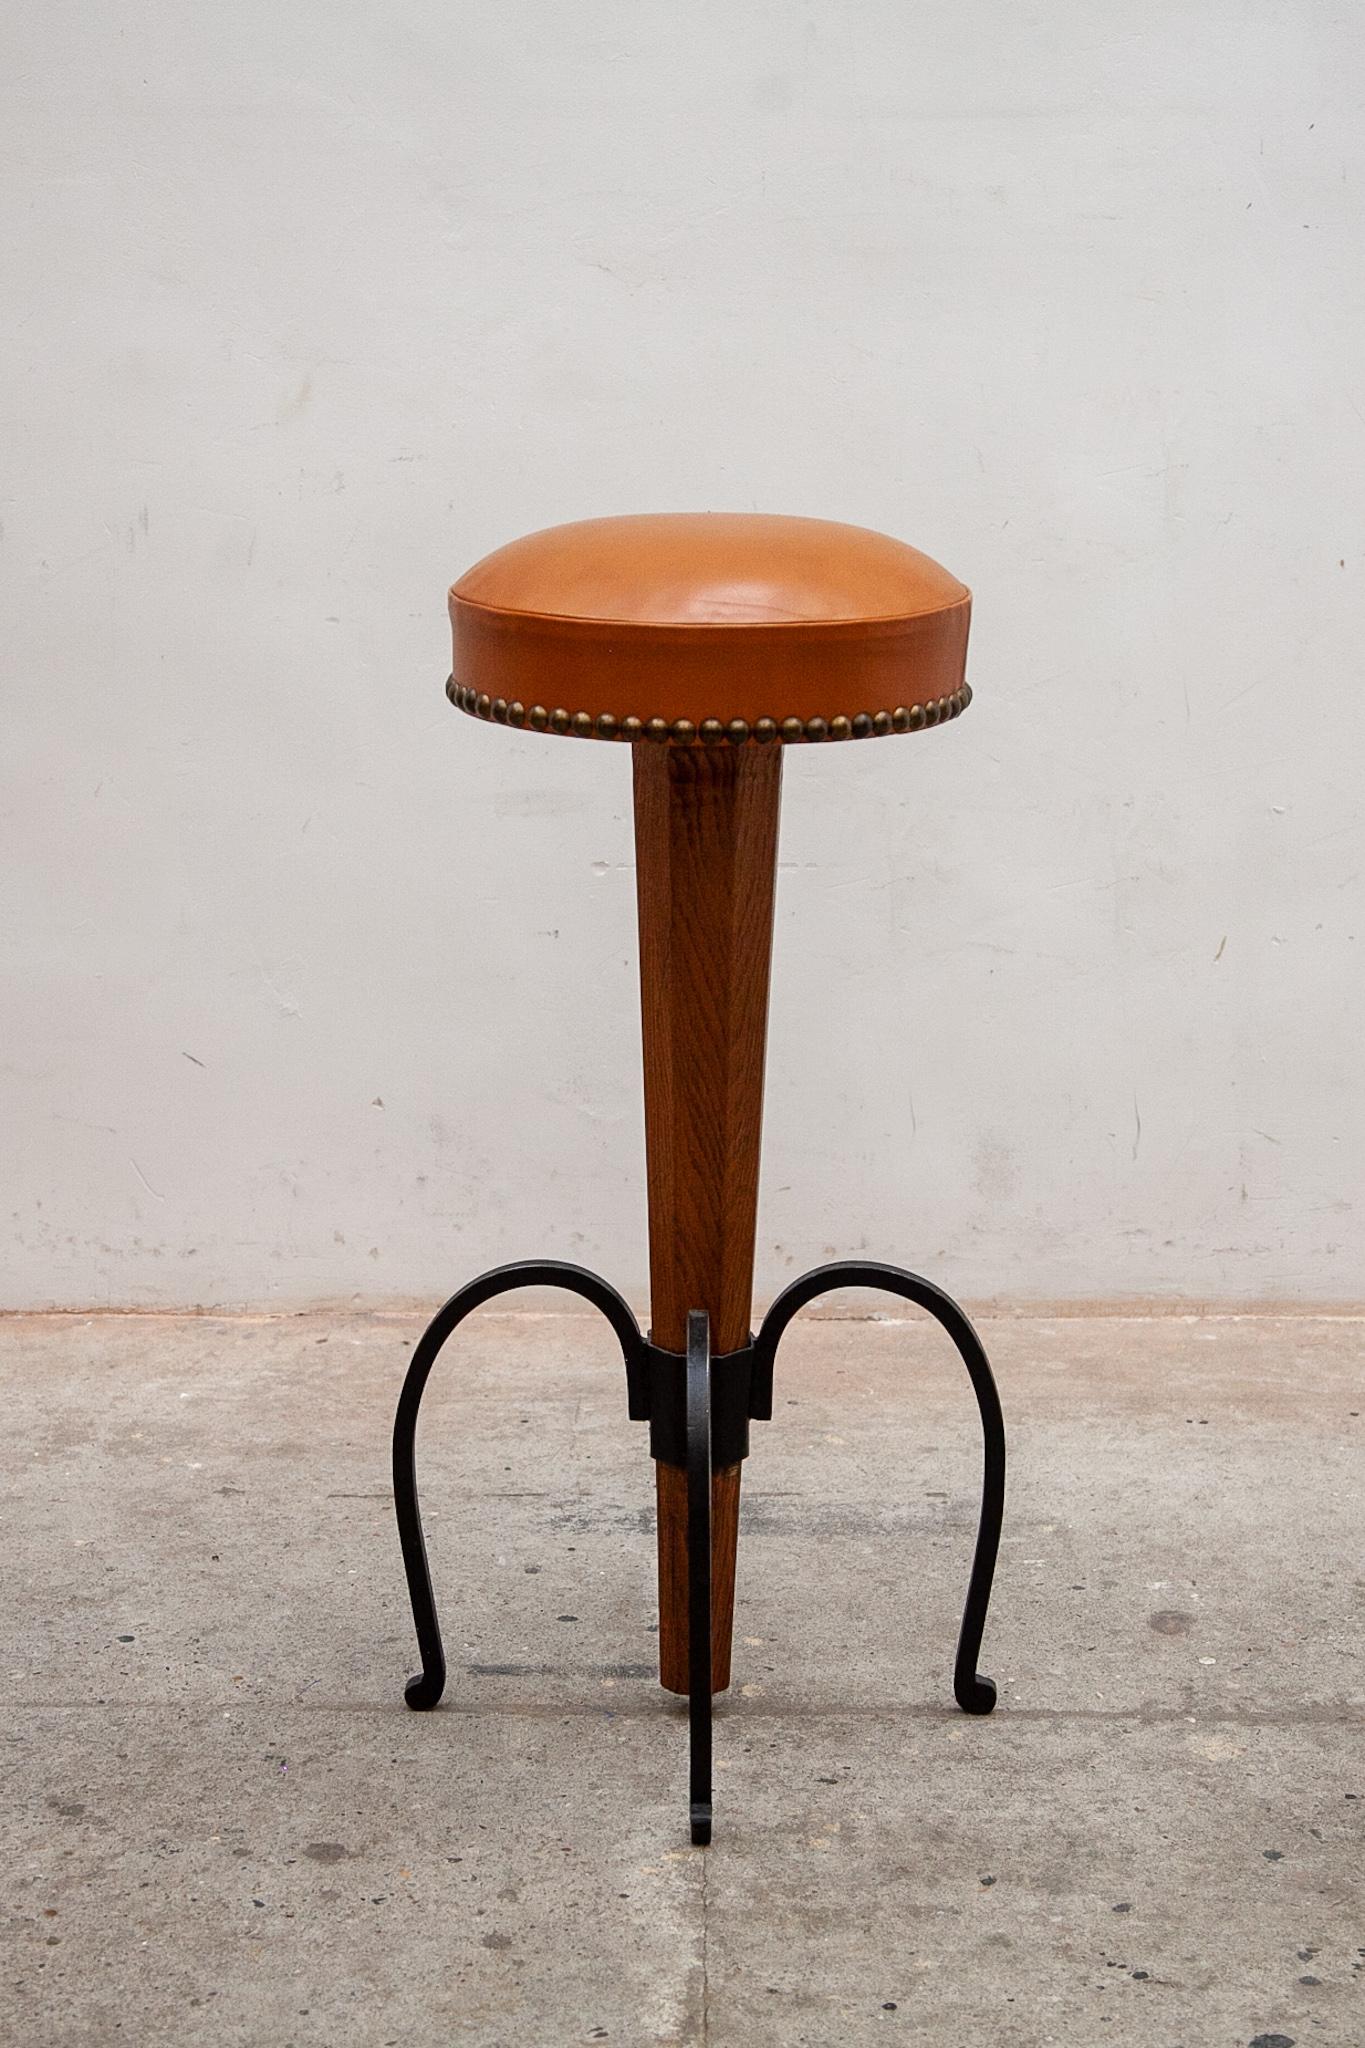 Hand-Crafted Set of four Brutalist Stools Wrought Iron, Round Camel Leather Seats